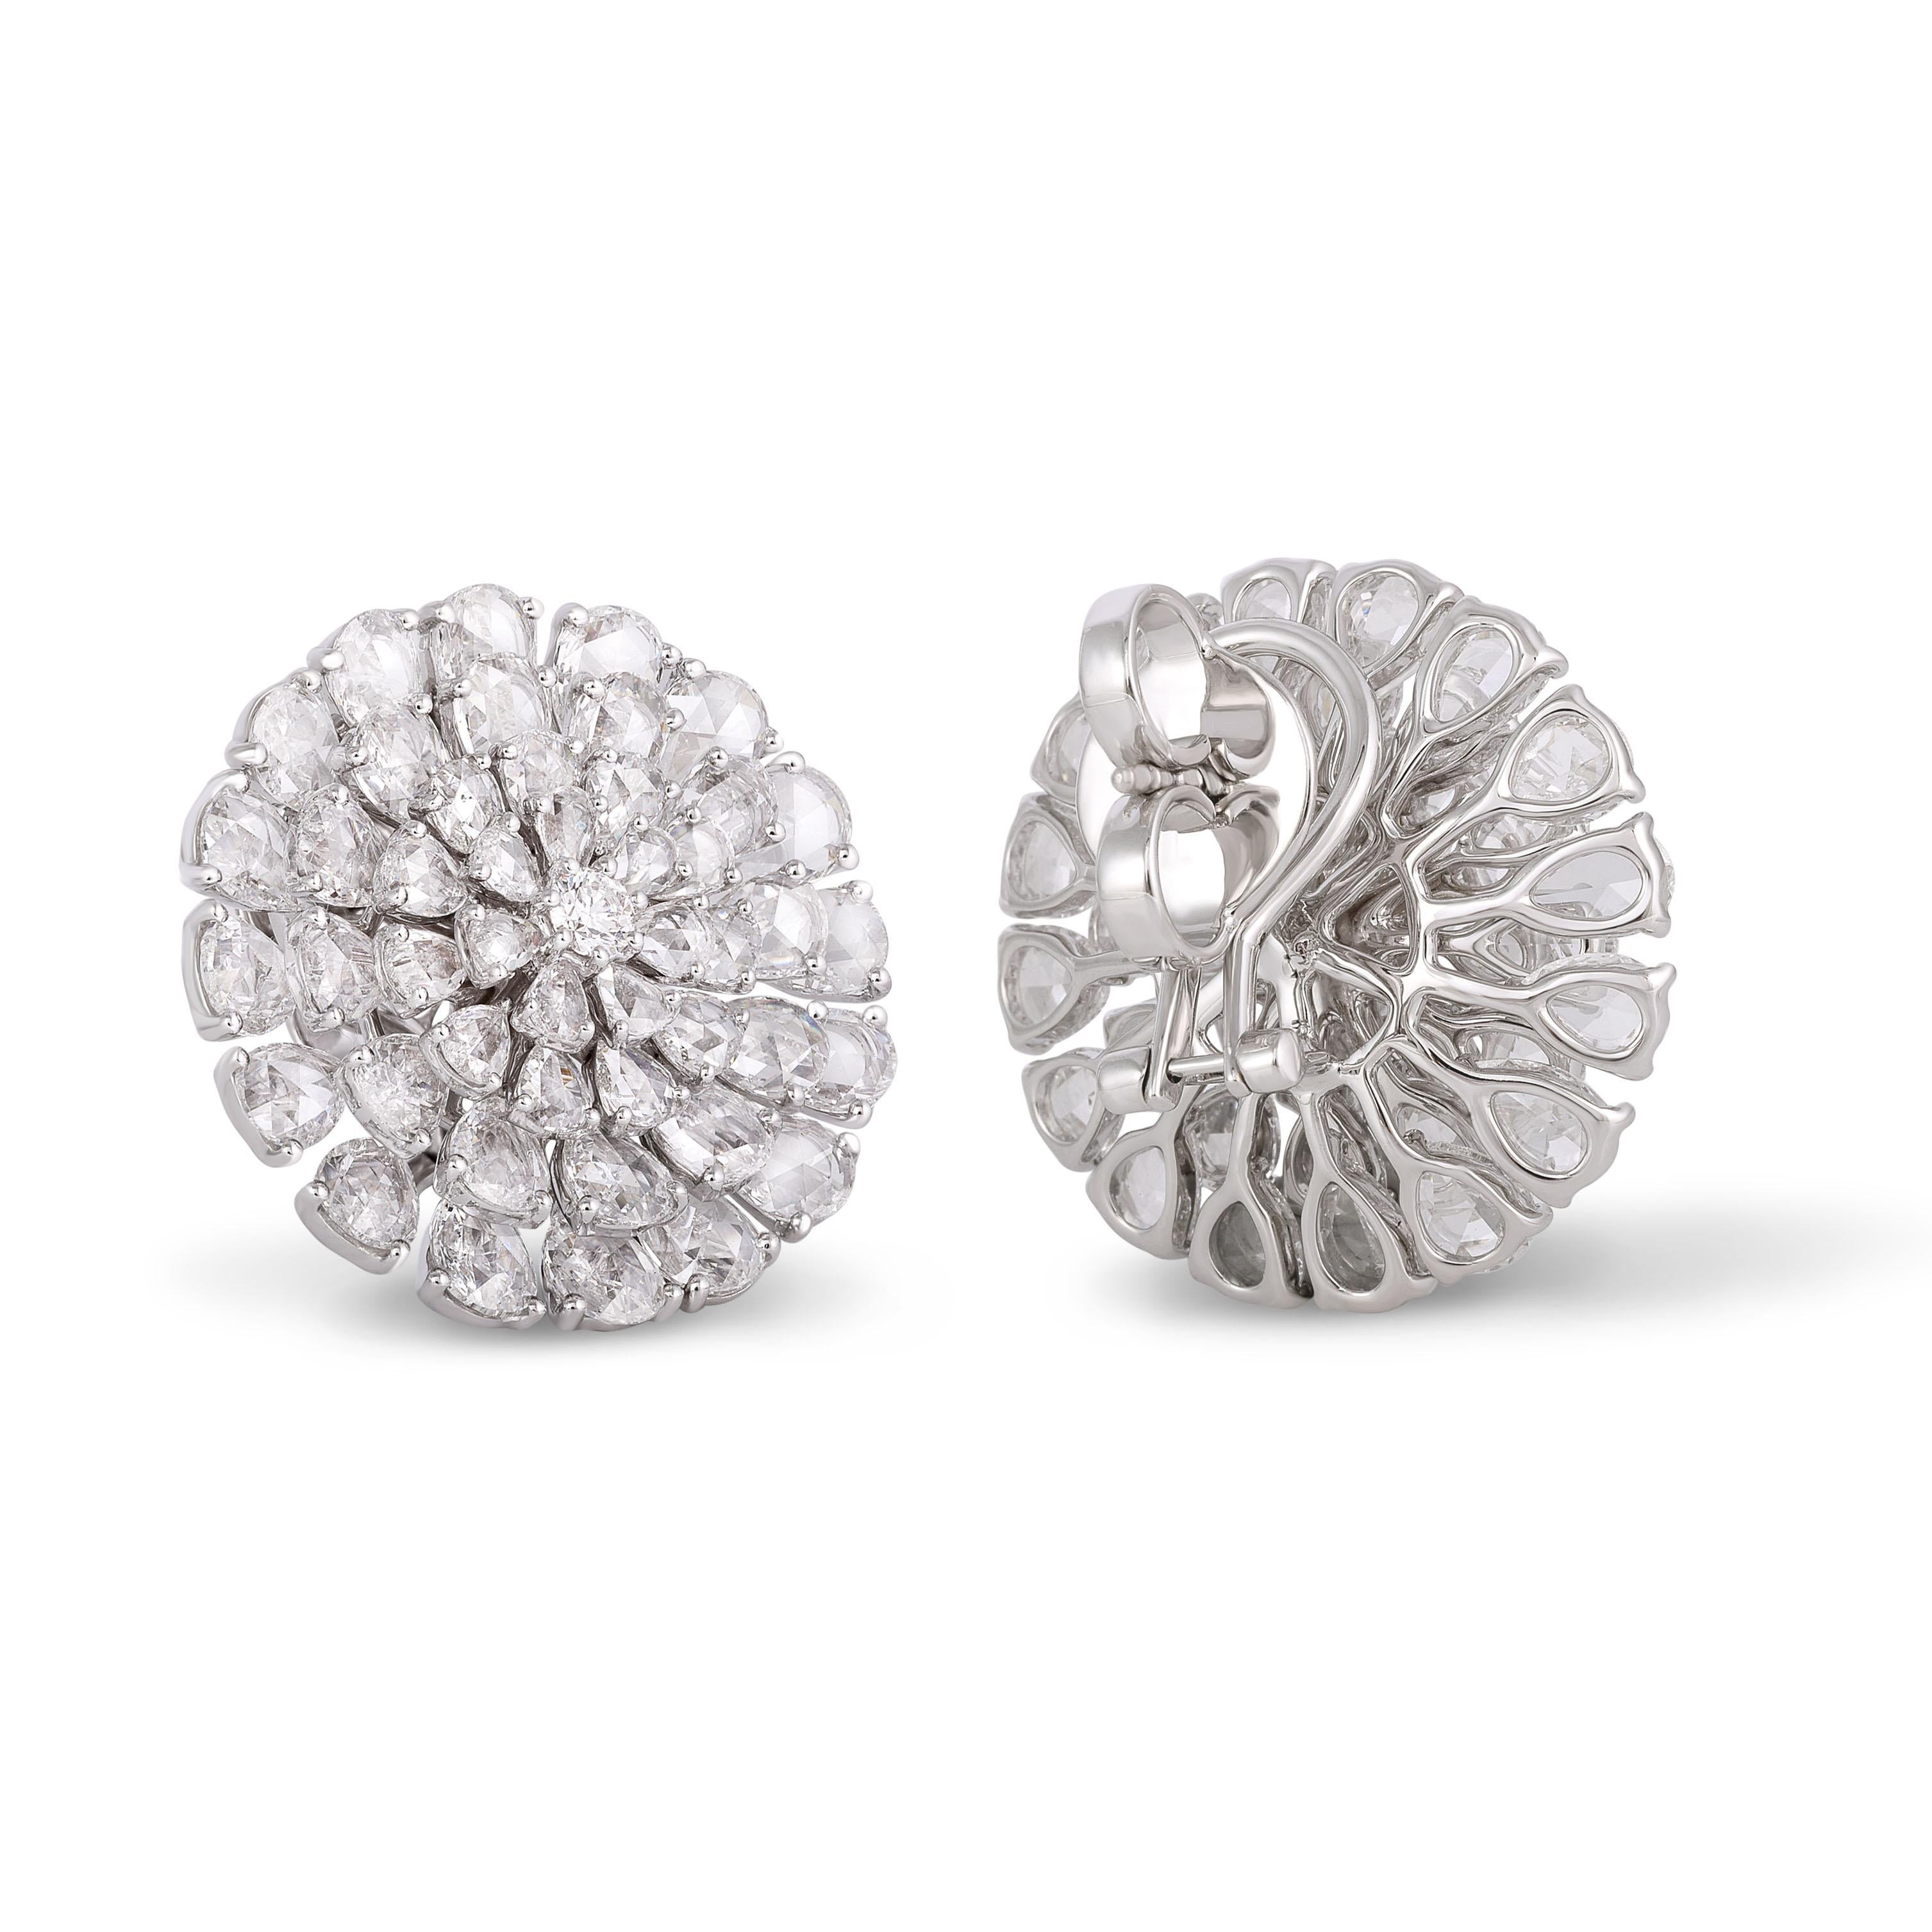 Rarever brings the floral collection taking the inspiration from the beauty and uniqueness of the flower. The earring is crafted with 92 pear shaped Rose Cut Diamonds set in step setting to attain the floral form of the earring, surrounding the